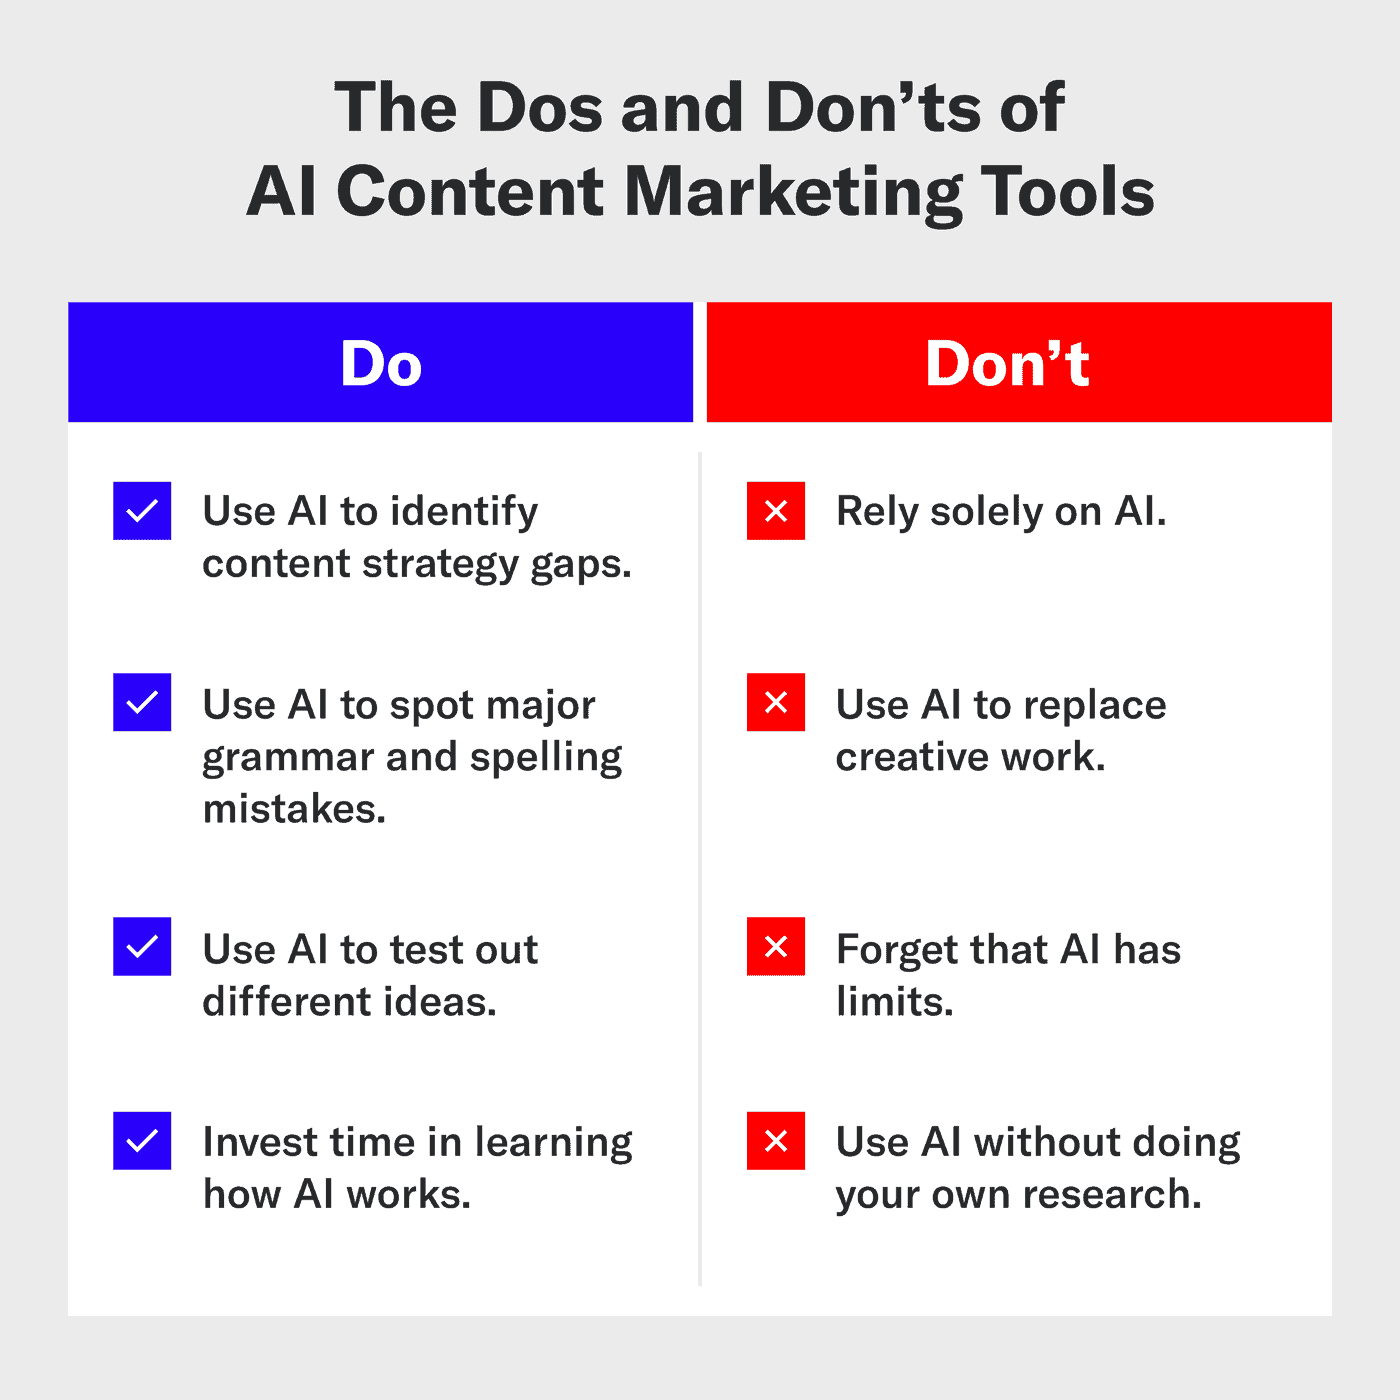 An image showing the dos and don'ts of AI content marketing tools